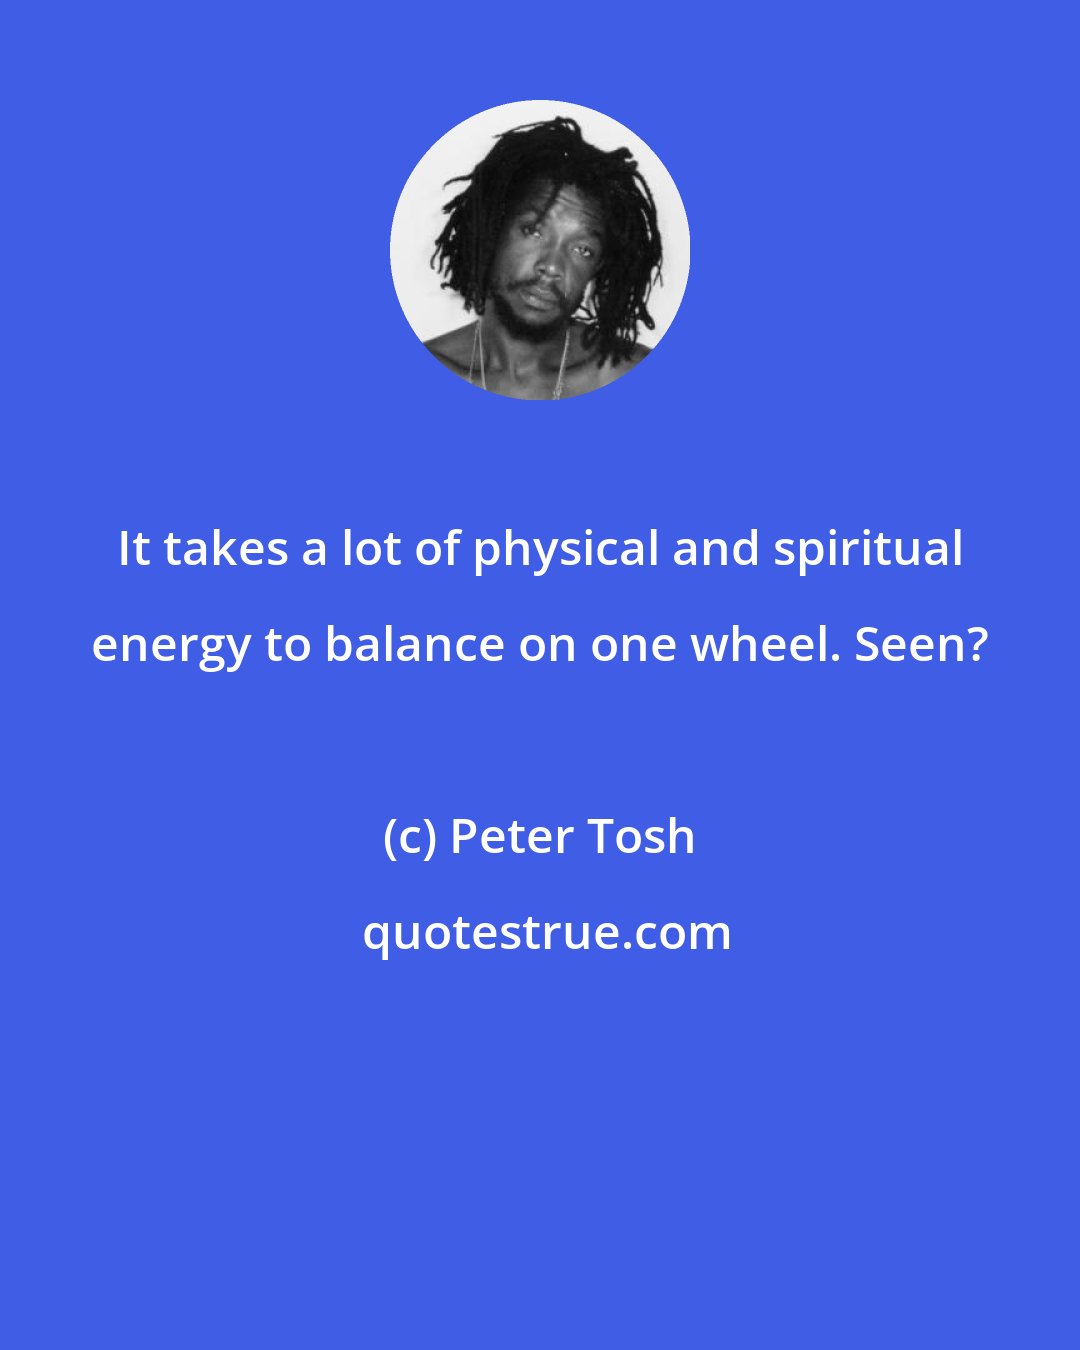 Peter Tosh: It takes a lot of physical and spiritual energy to balance on one wheel. Seen?